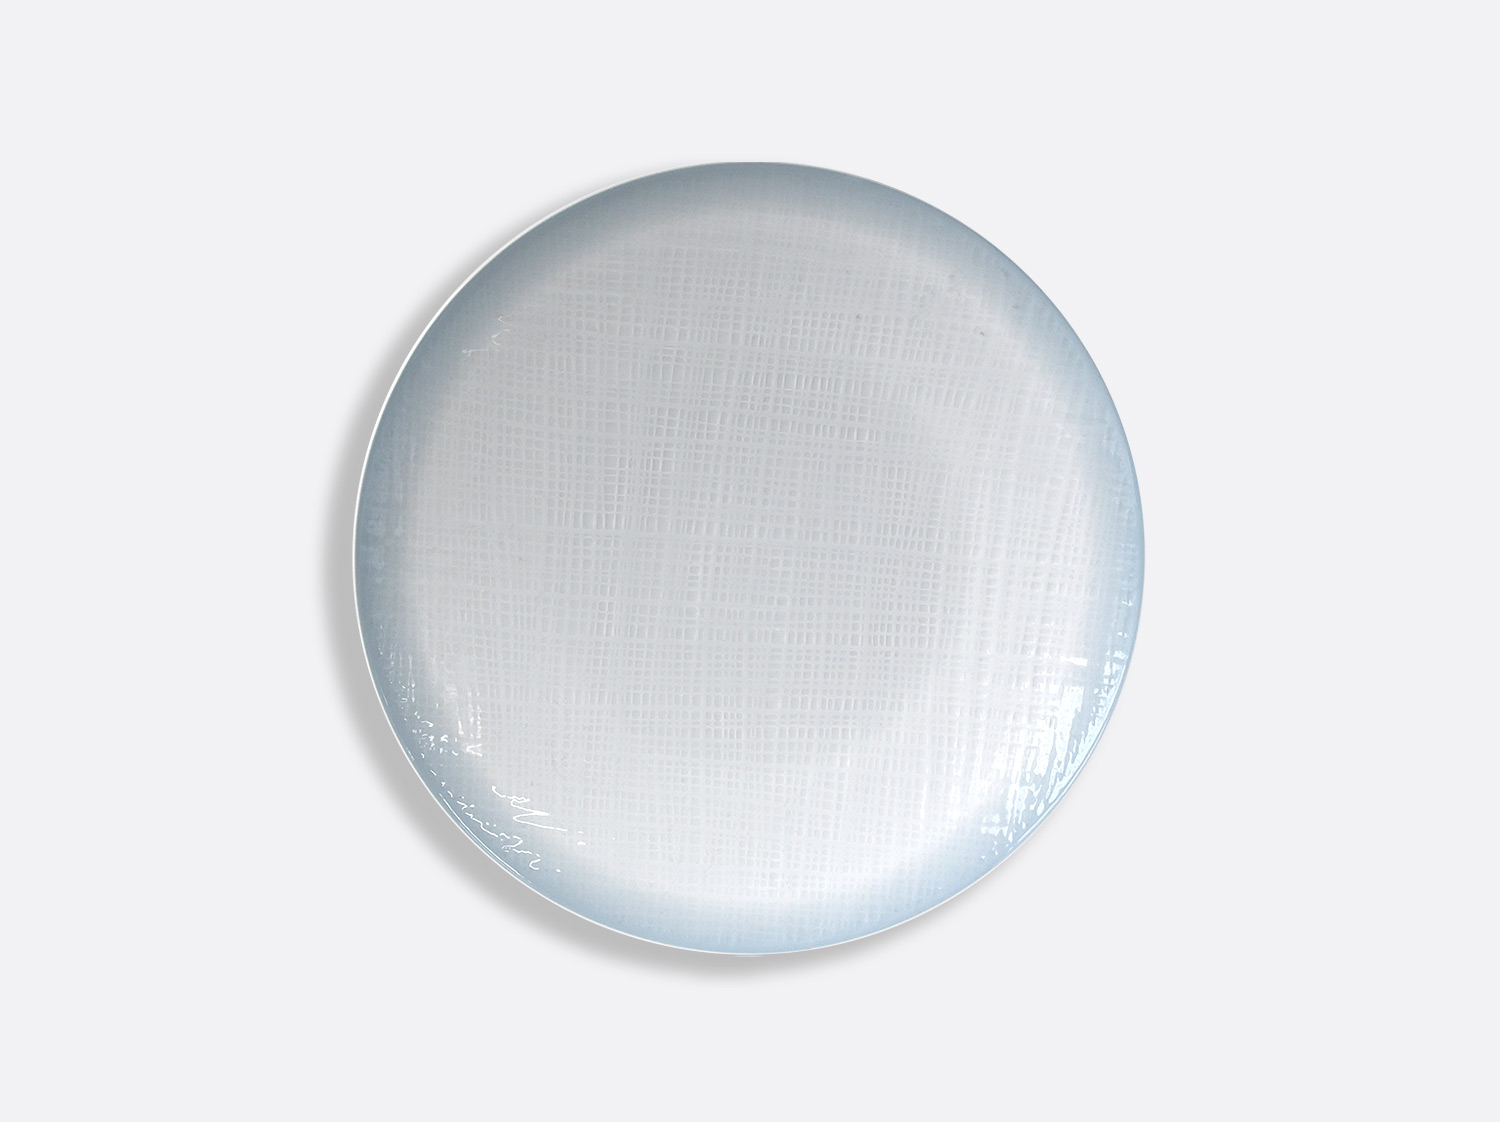 China Coupe plate 8.5" of the collection Eclipse | Bernardaud